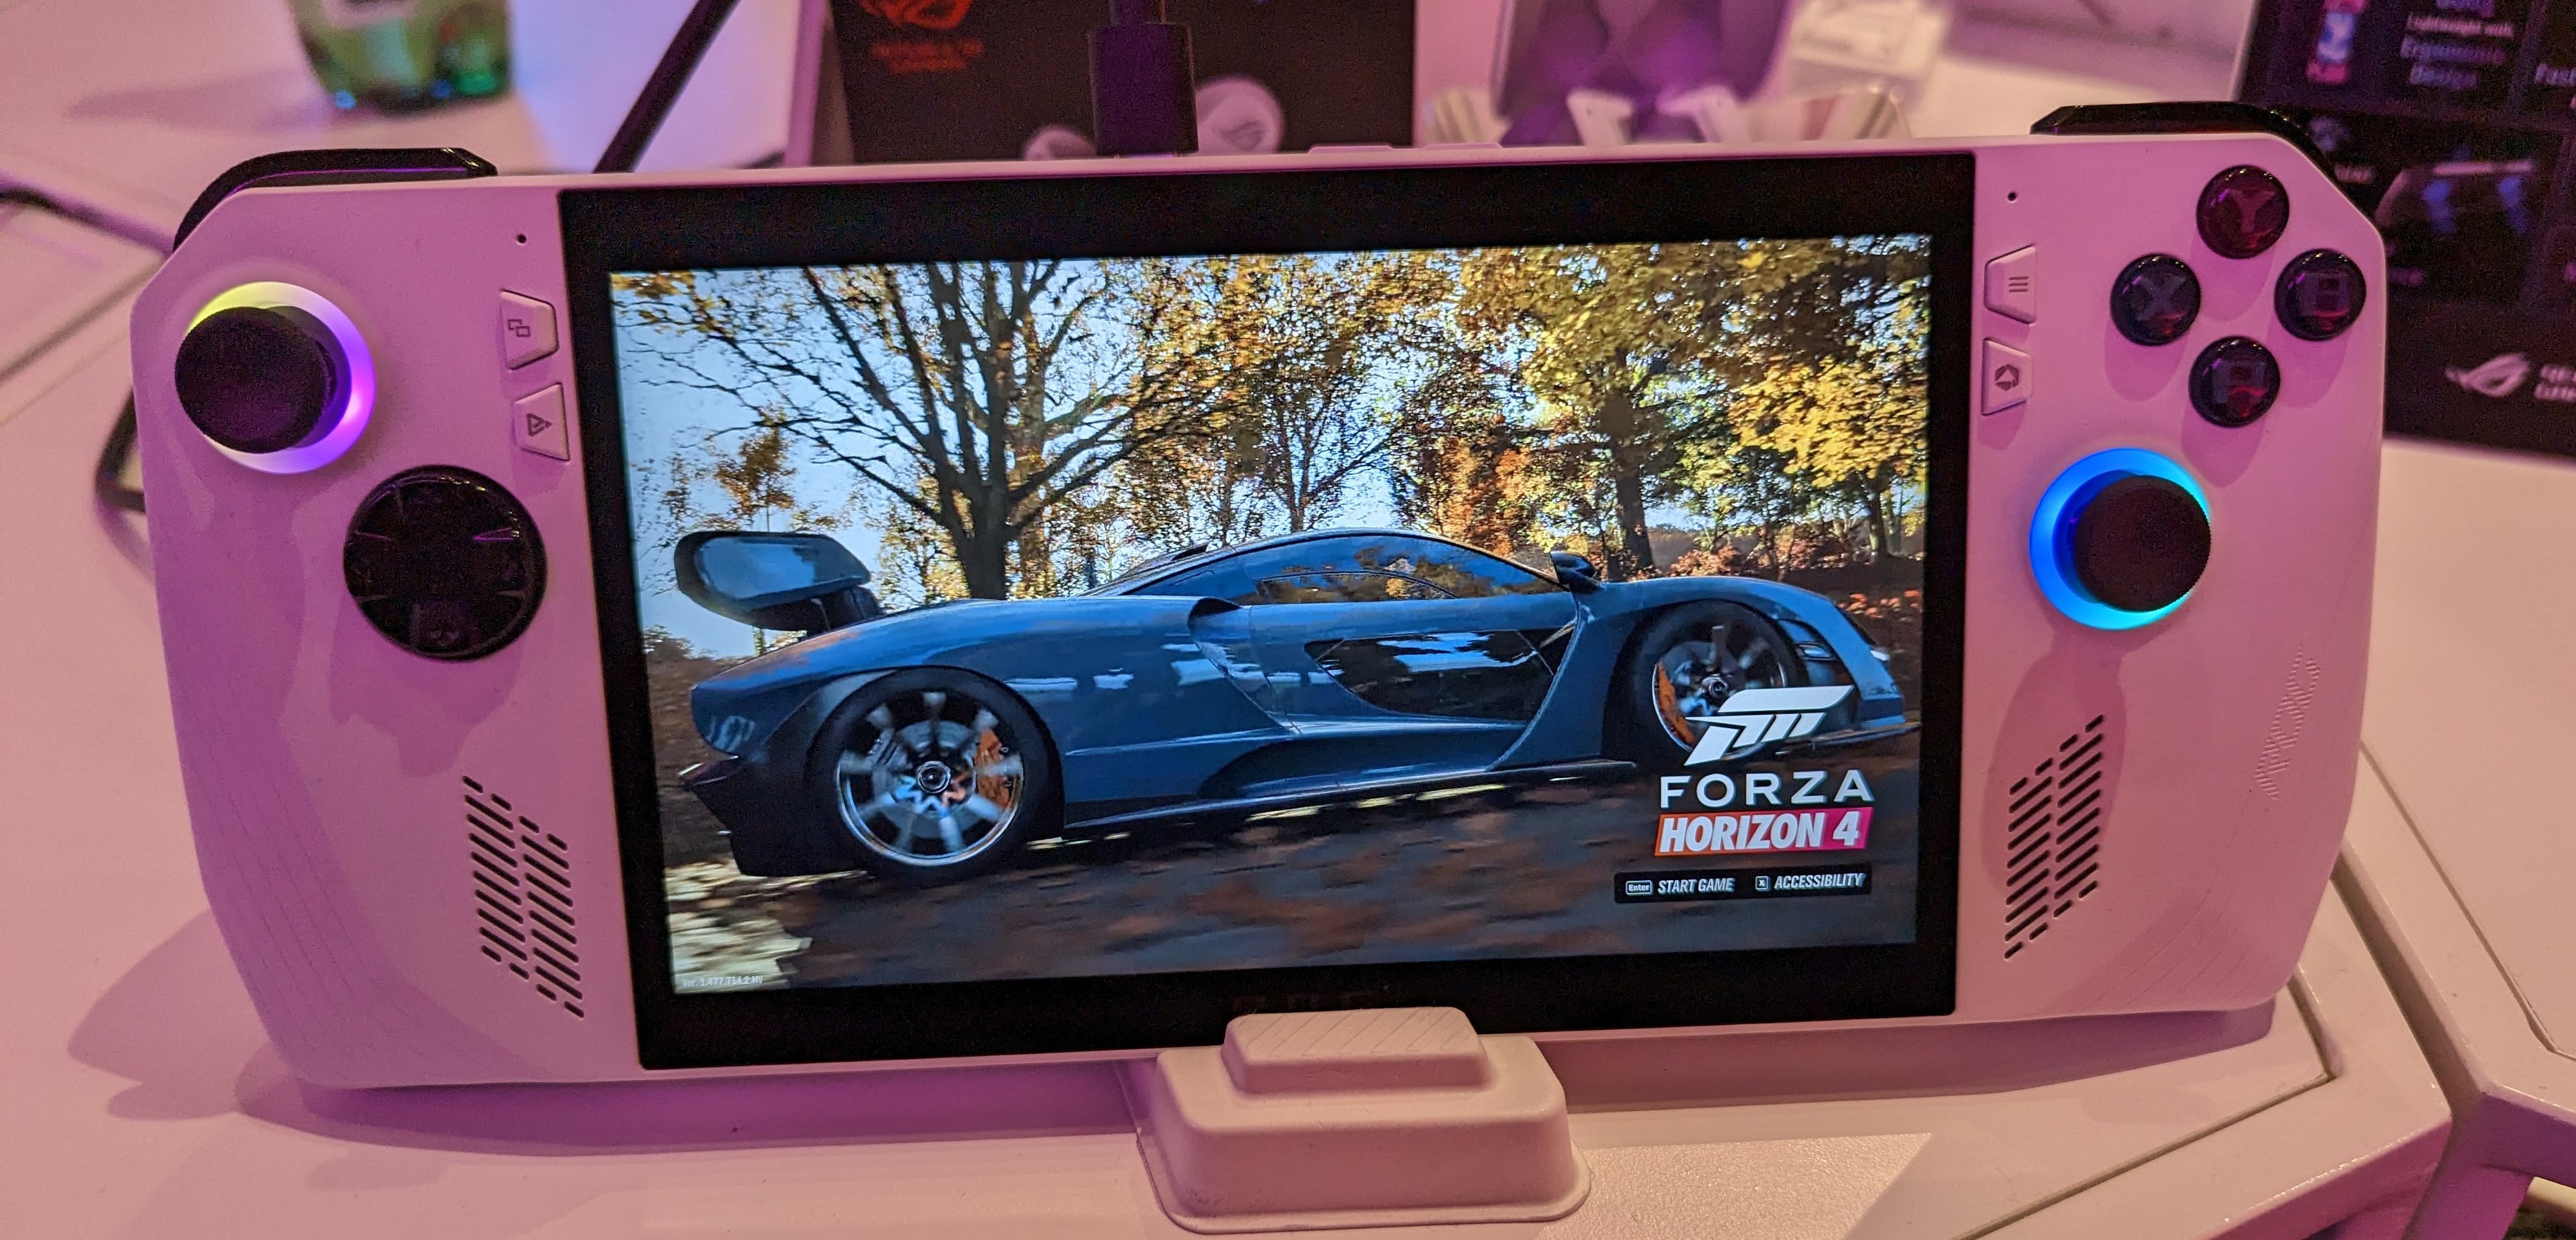 DF Weekly: Hands-on with the Asus ROG Ally - is it really a Steam